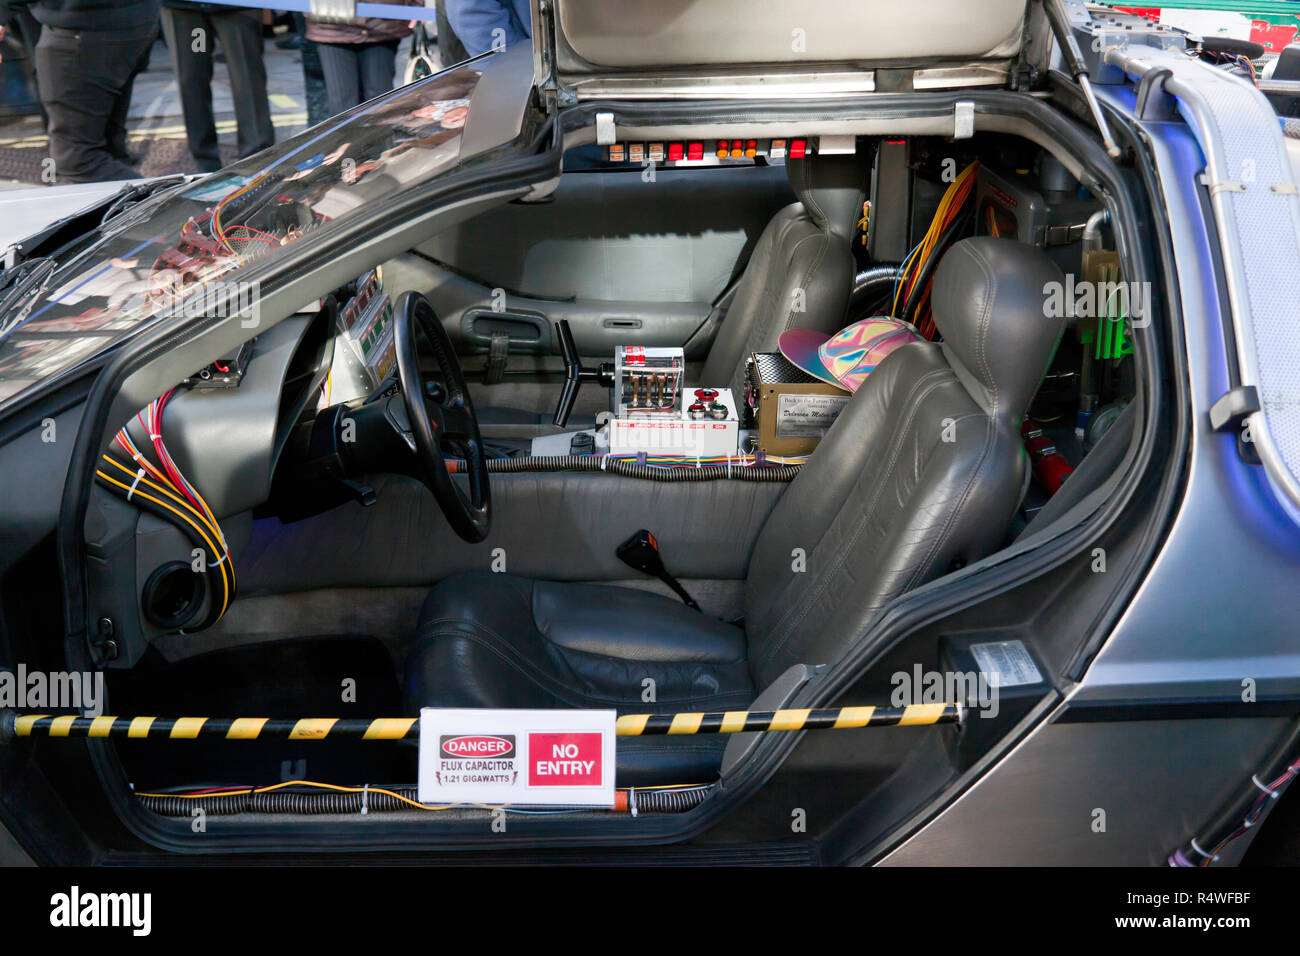 Interior view of the DeLorean time machine  from the Back to the Future films, on display at the 2018 Regents Street Motor Show Stock Photo